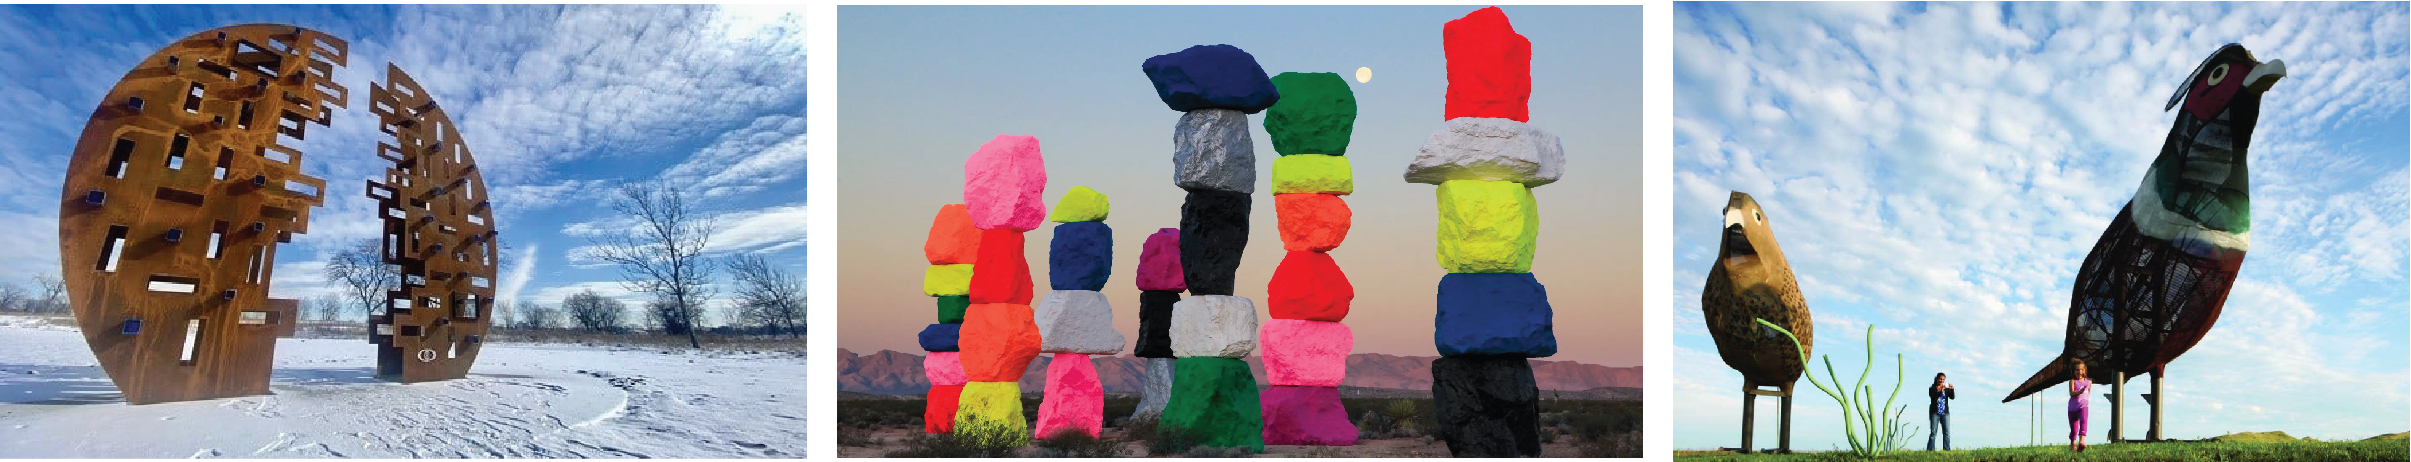 3 different placemaking sculptures in Michigan, Nevada and North Dakota